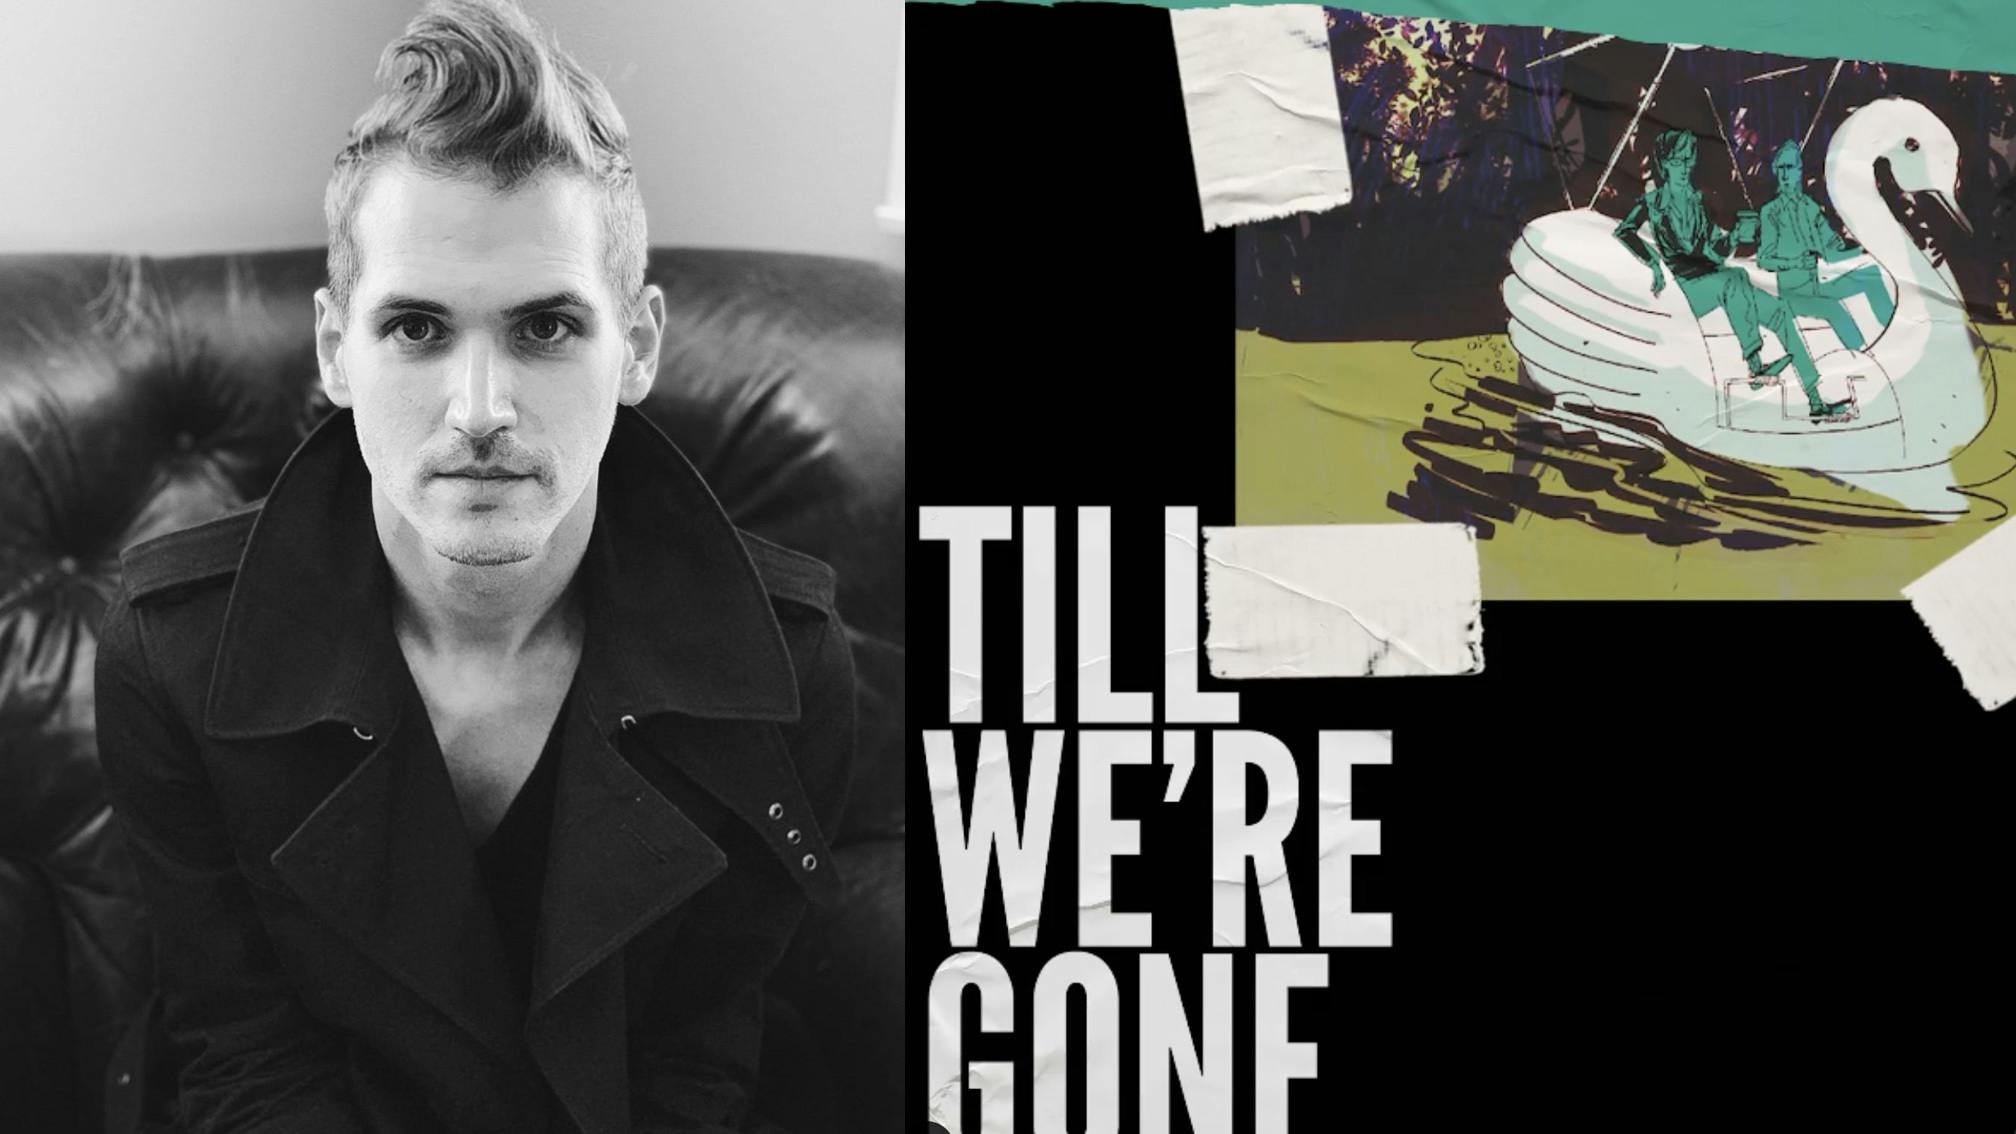 Mikey Way's Electric Century are teasing a new song, Till We're Gone